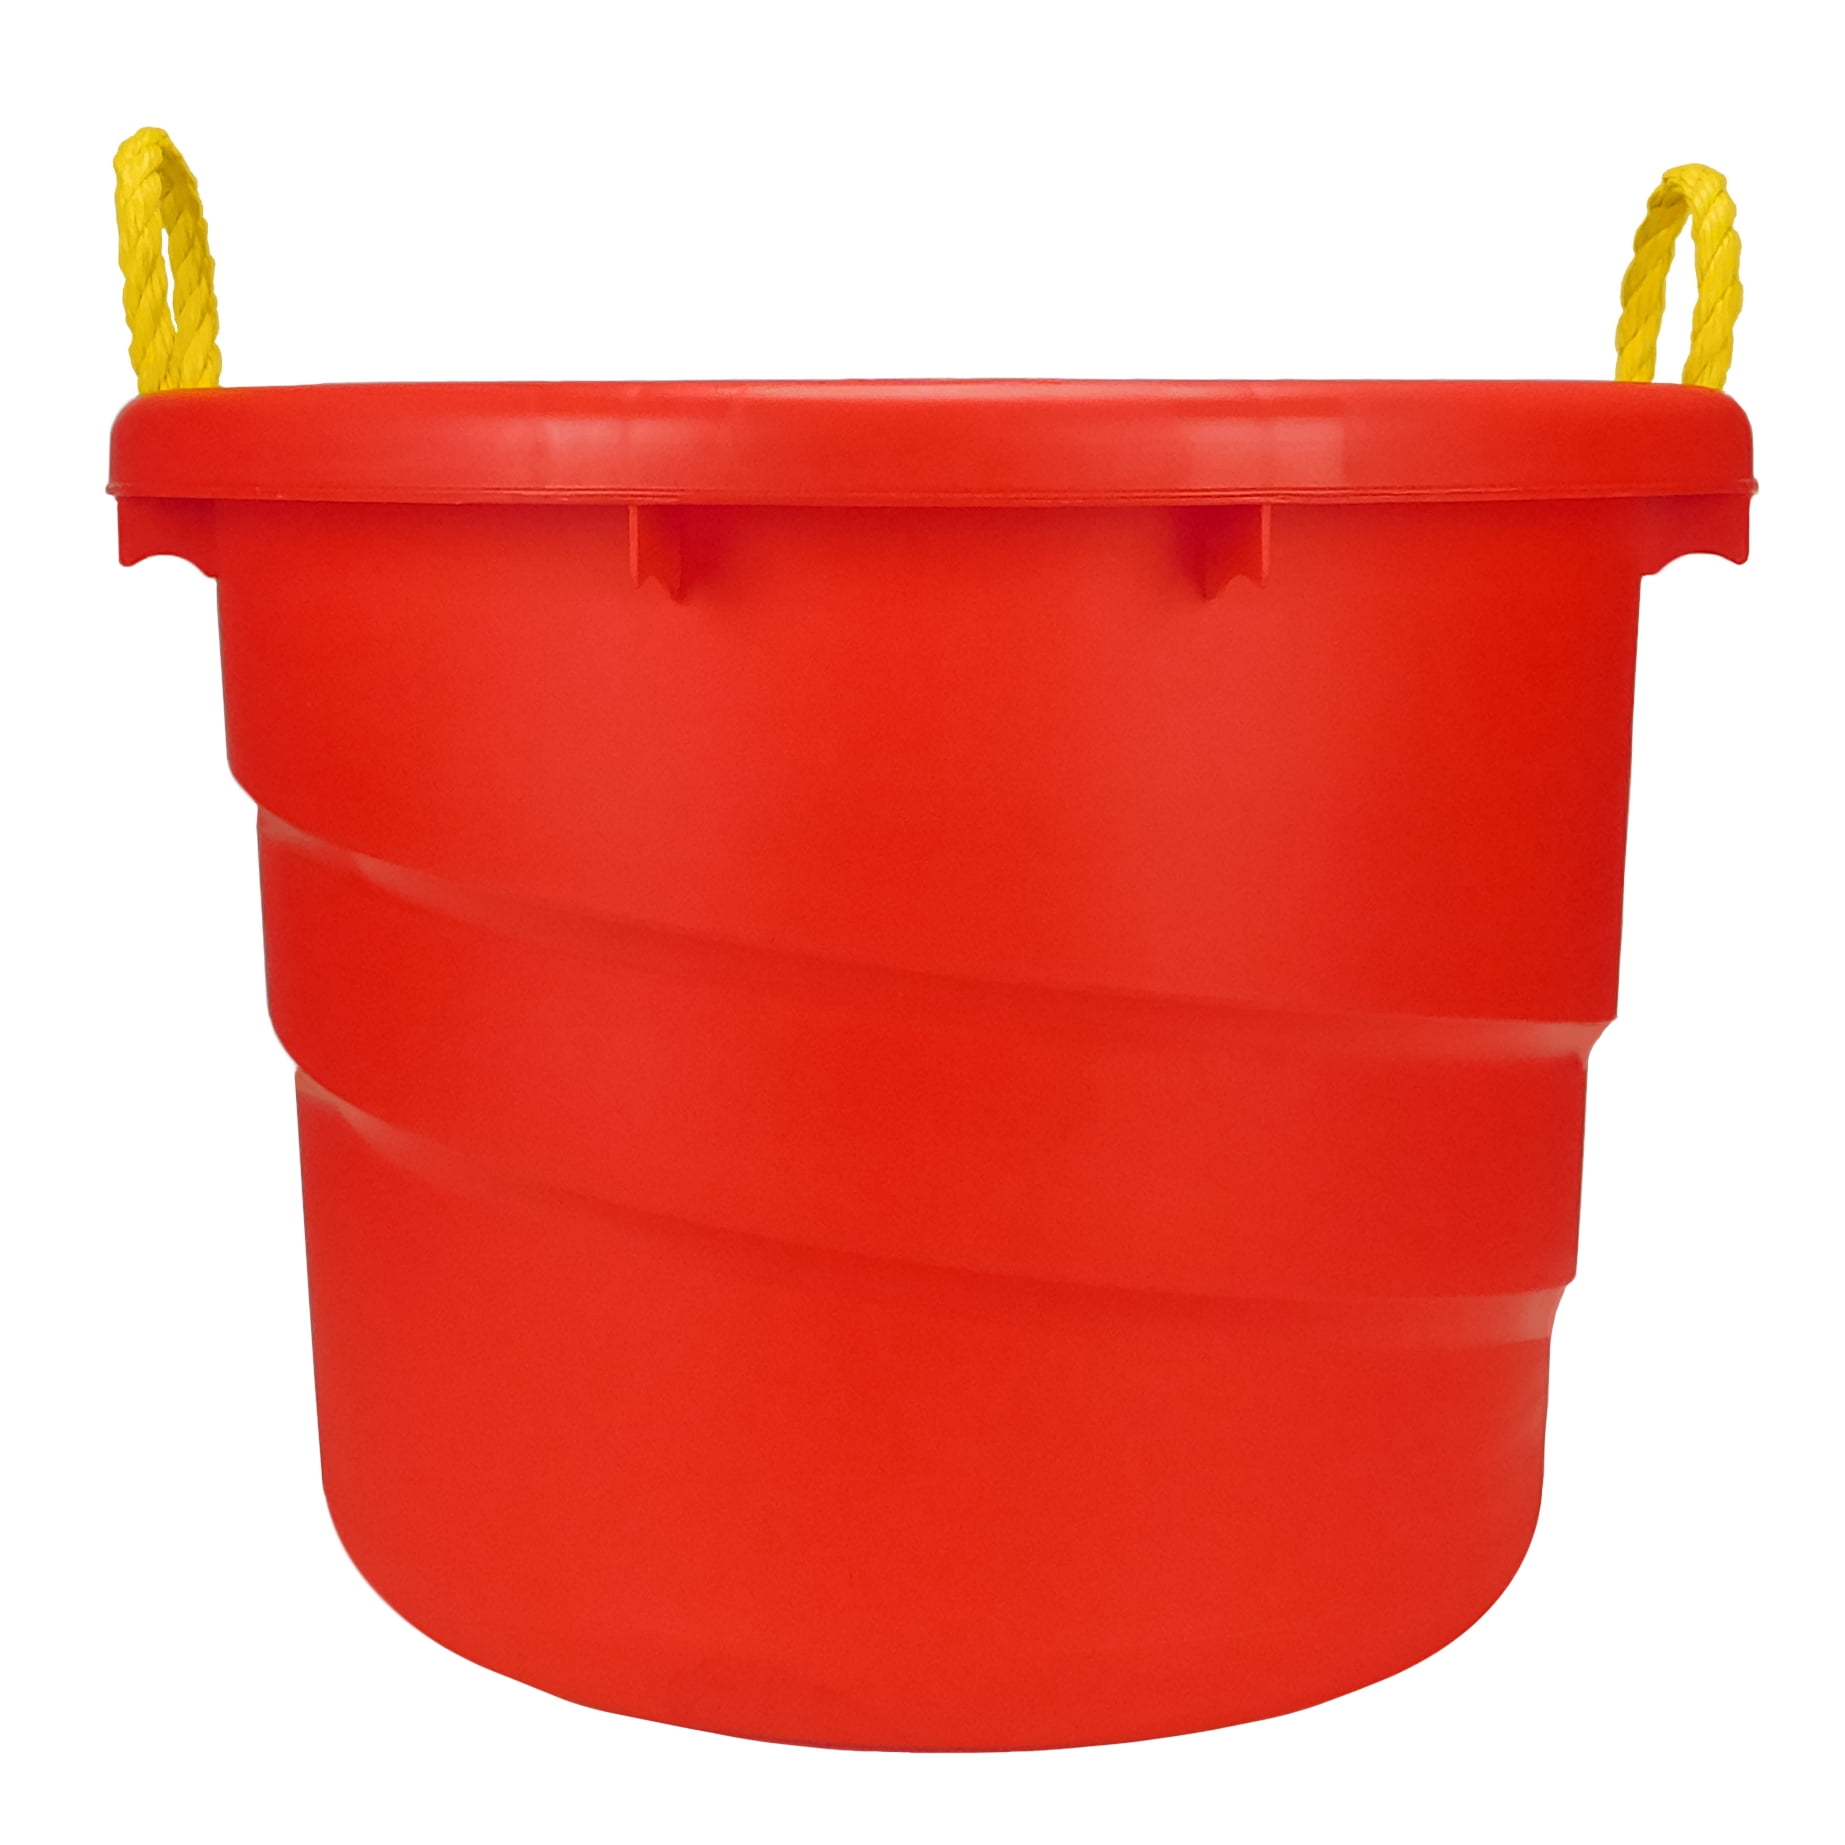 Plastic Utility Tub with Rope Handles, 23 Gallon, Red, Set